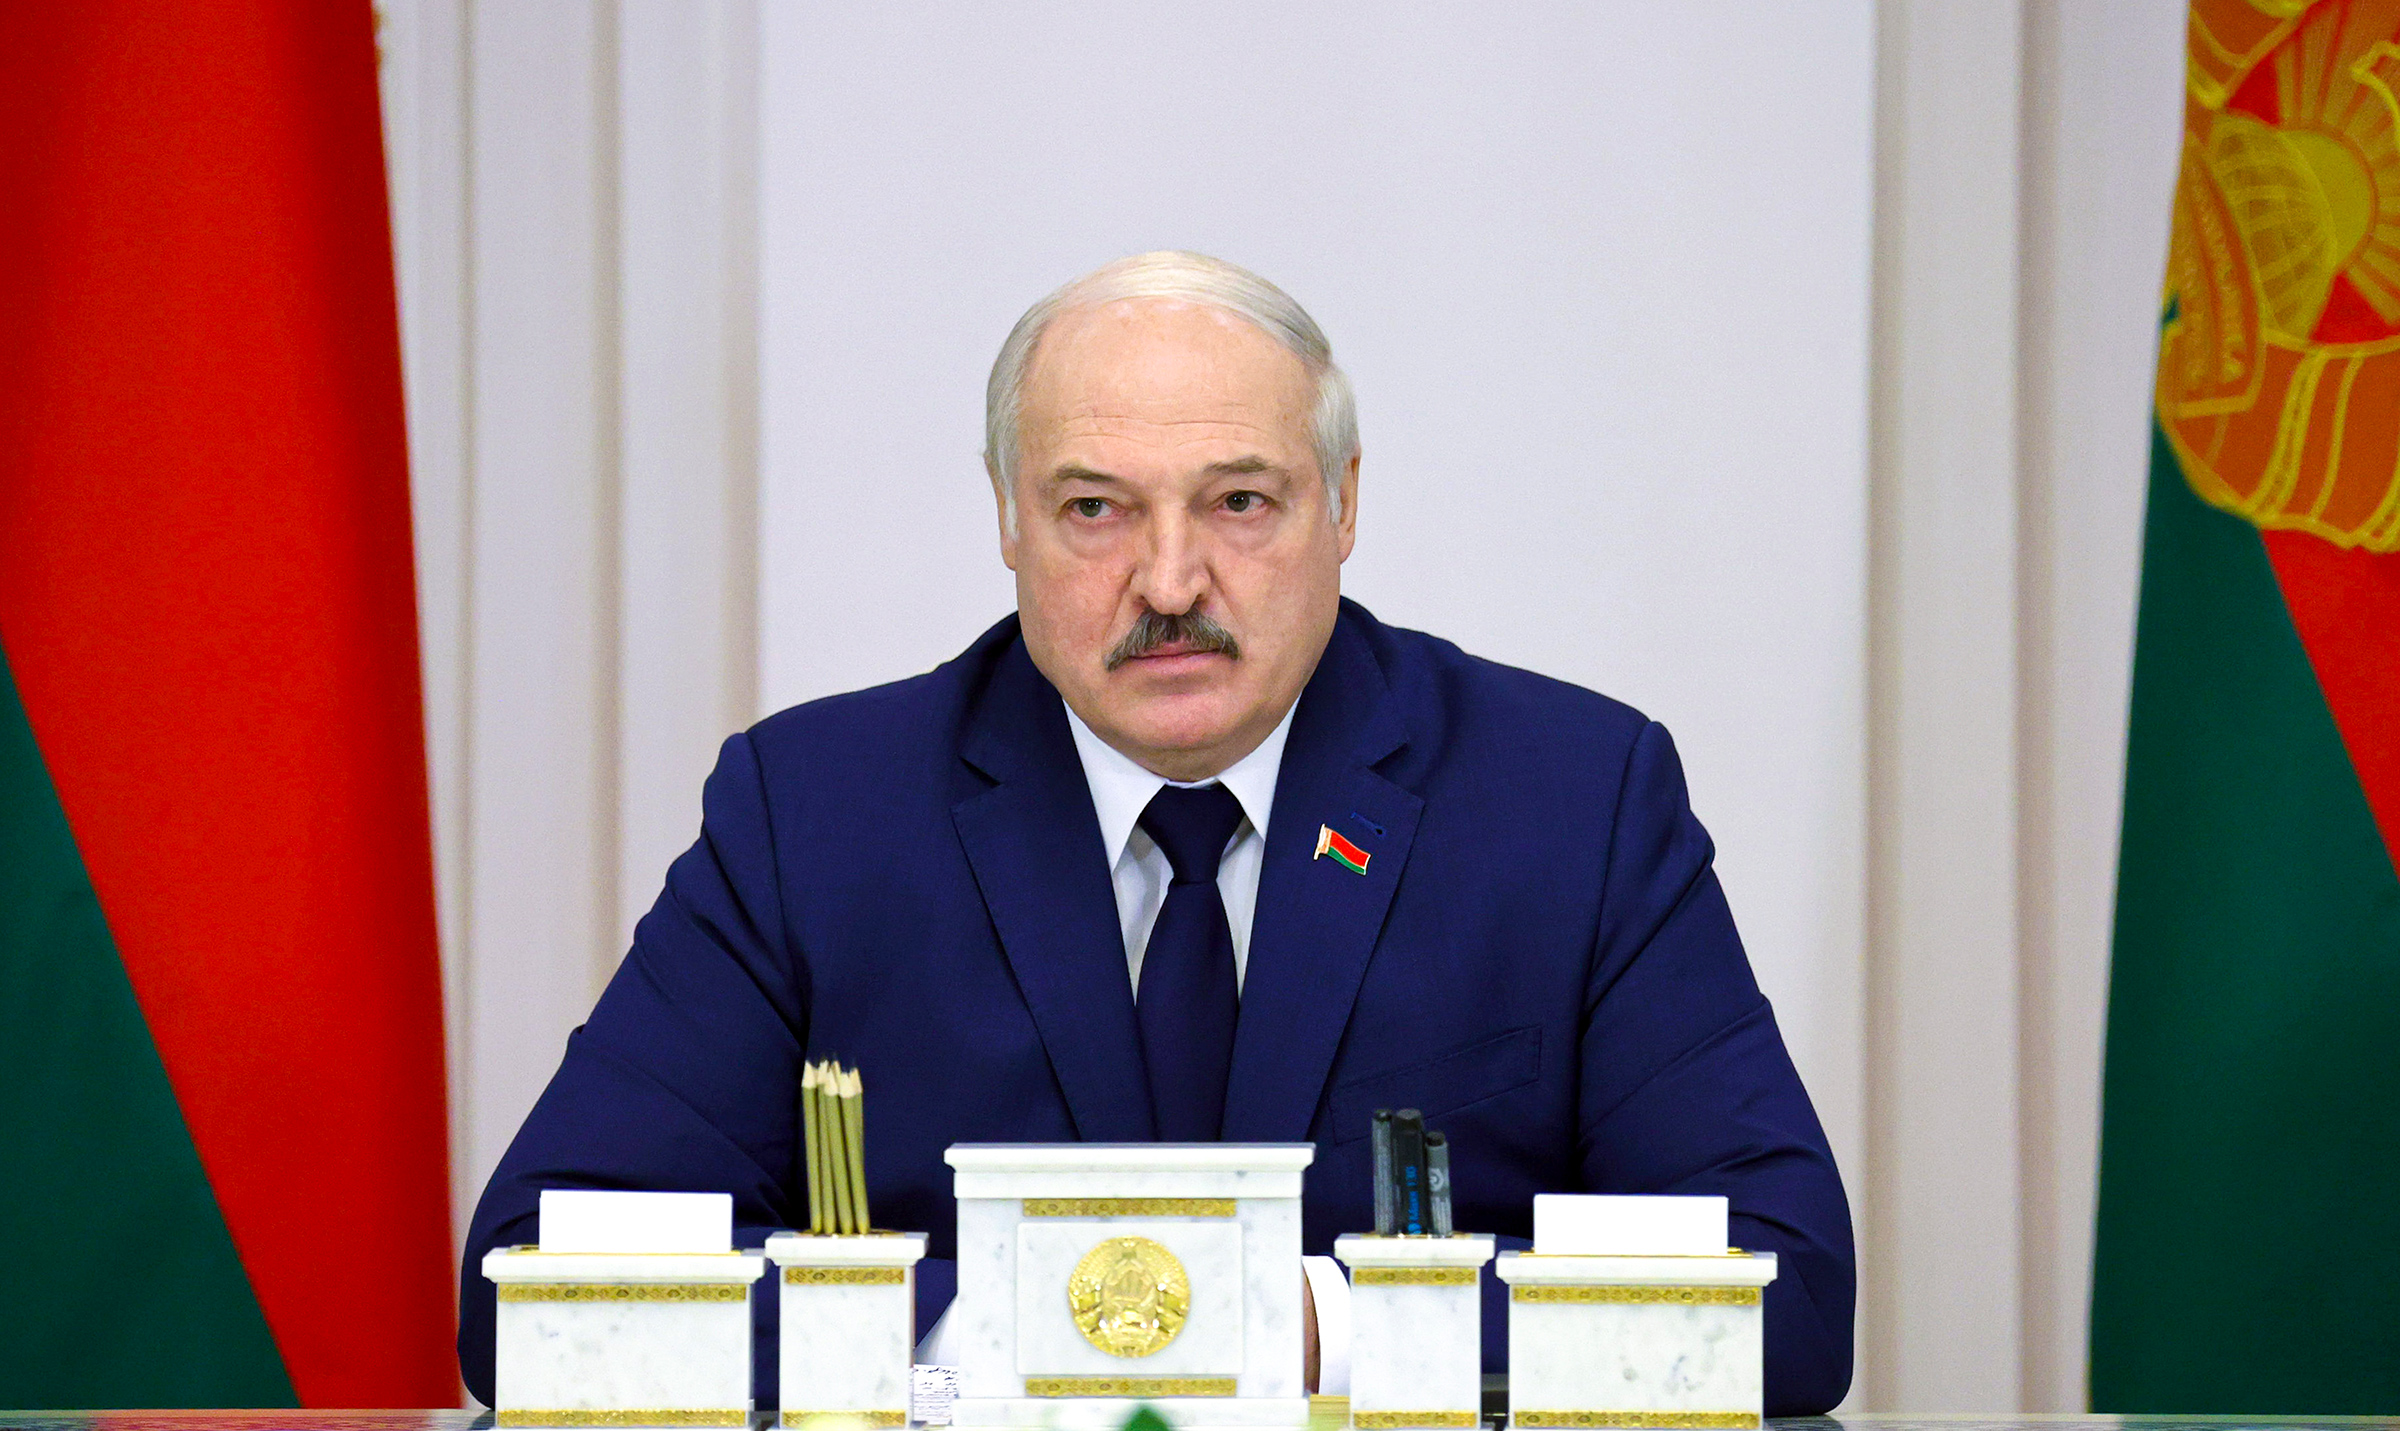 Belarusian President Alexander Lukashenko speaks during a cabinet meeting in Minsk on Nov. 11. Lukashenko on Thursday called the Russian bomber flights a necessary response to the tensions on the Belarus-Poland border. (Nikolay Petrov—Pool/BelTA/AP)